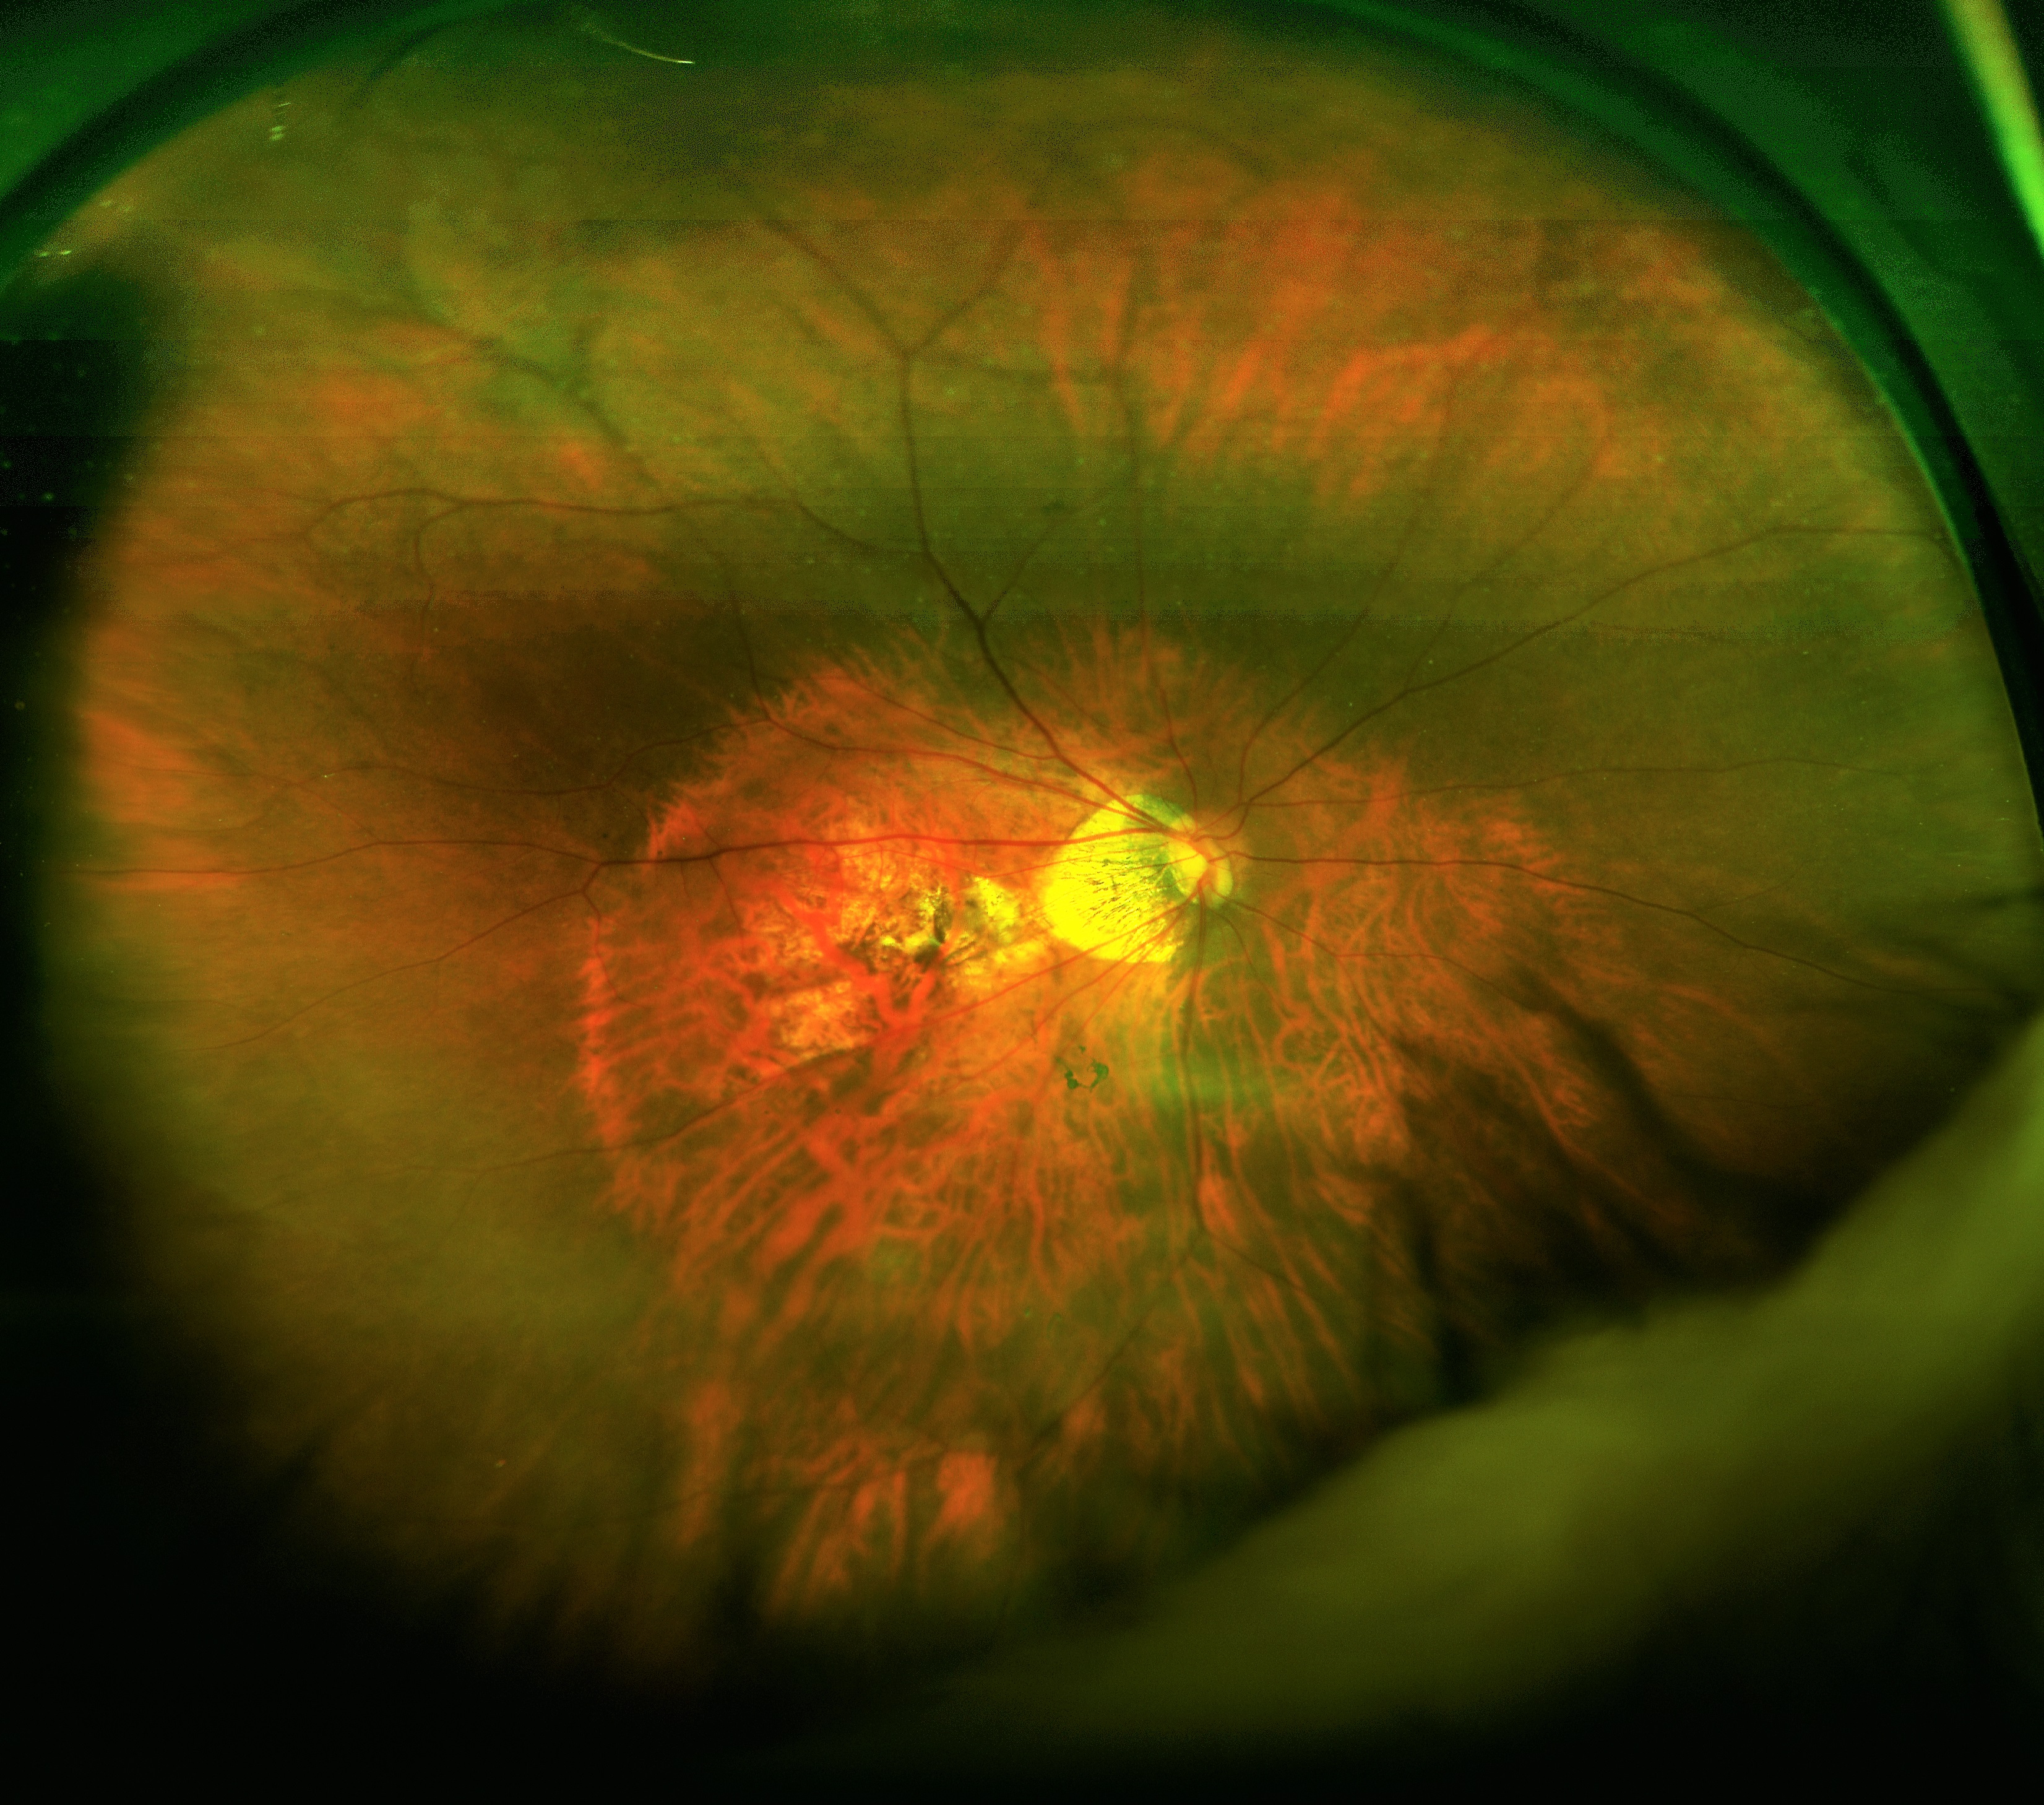 Figure 1: Widefield optos image of myopic fundus demonstrating a tessallated fundus, tilted optic disc with a myopic cone and macula atrophy. The outline of a poterior staphyloma is also visible